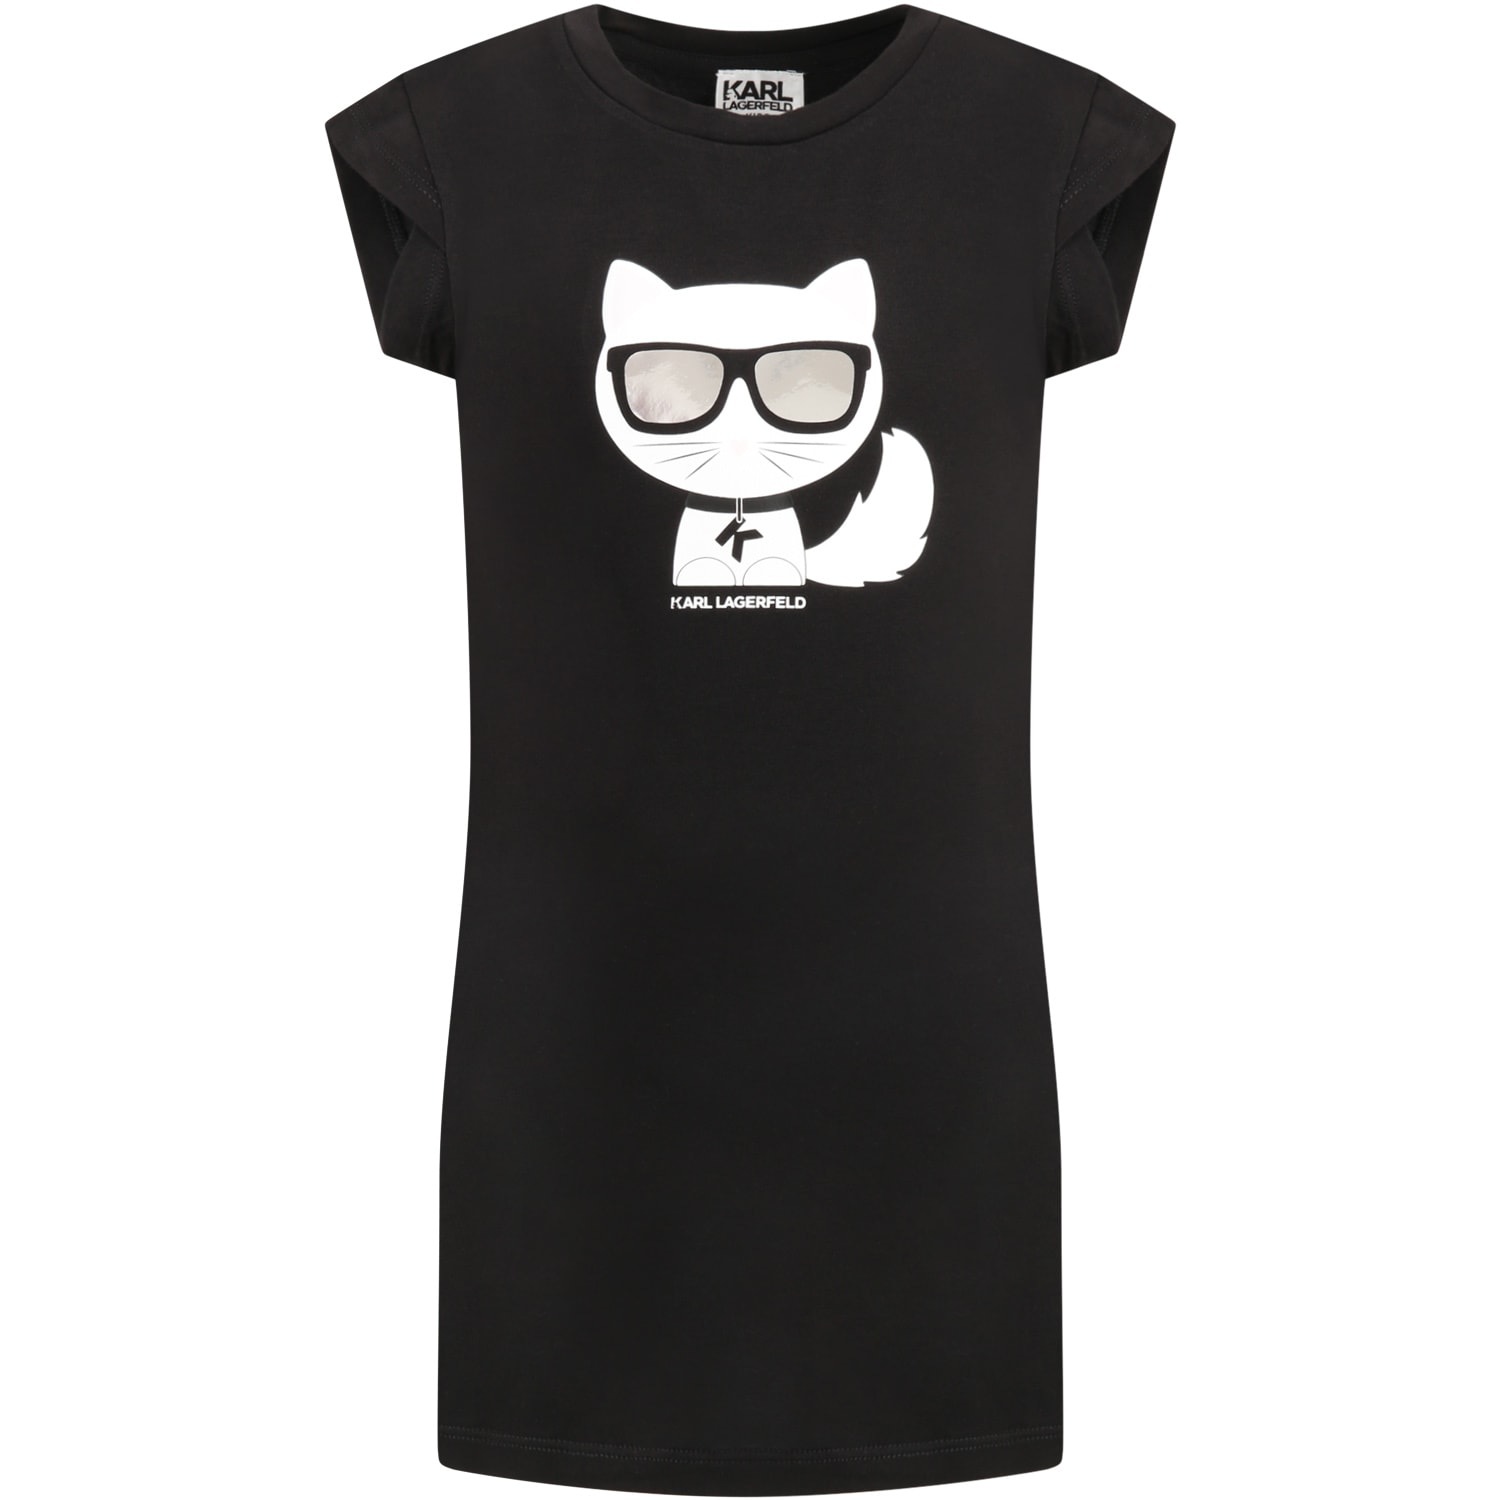 KARL LAGERFELD BLACK DRESS FOR GIRL WITH CHOUPETTE,11773033